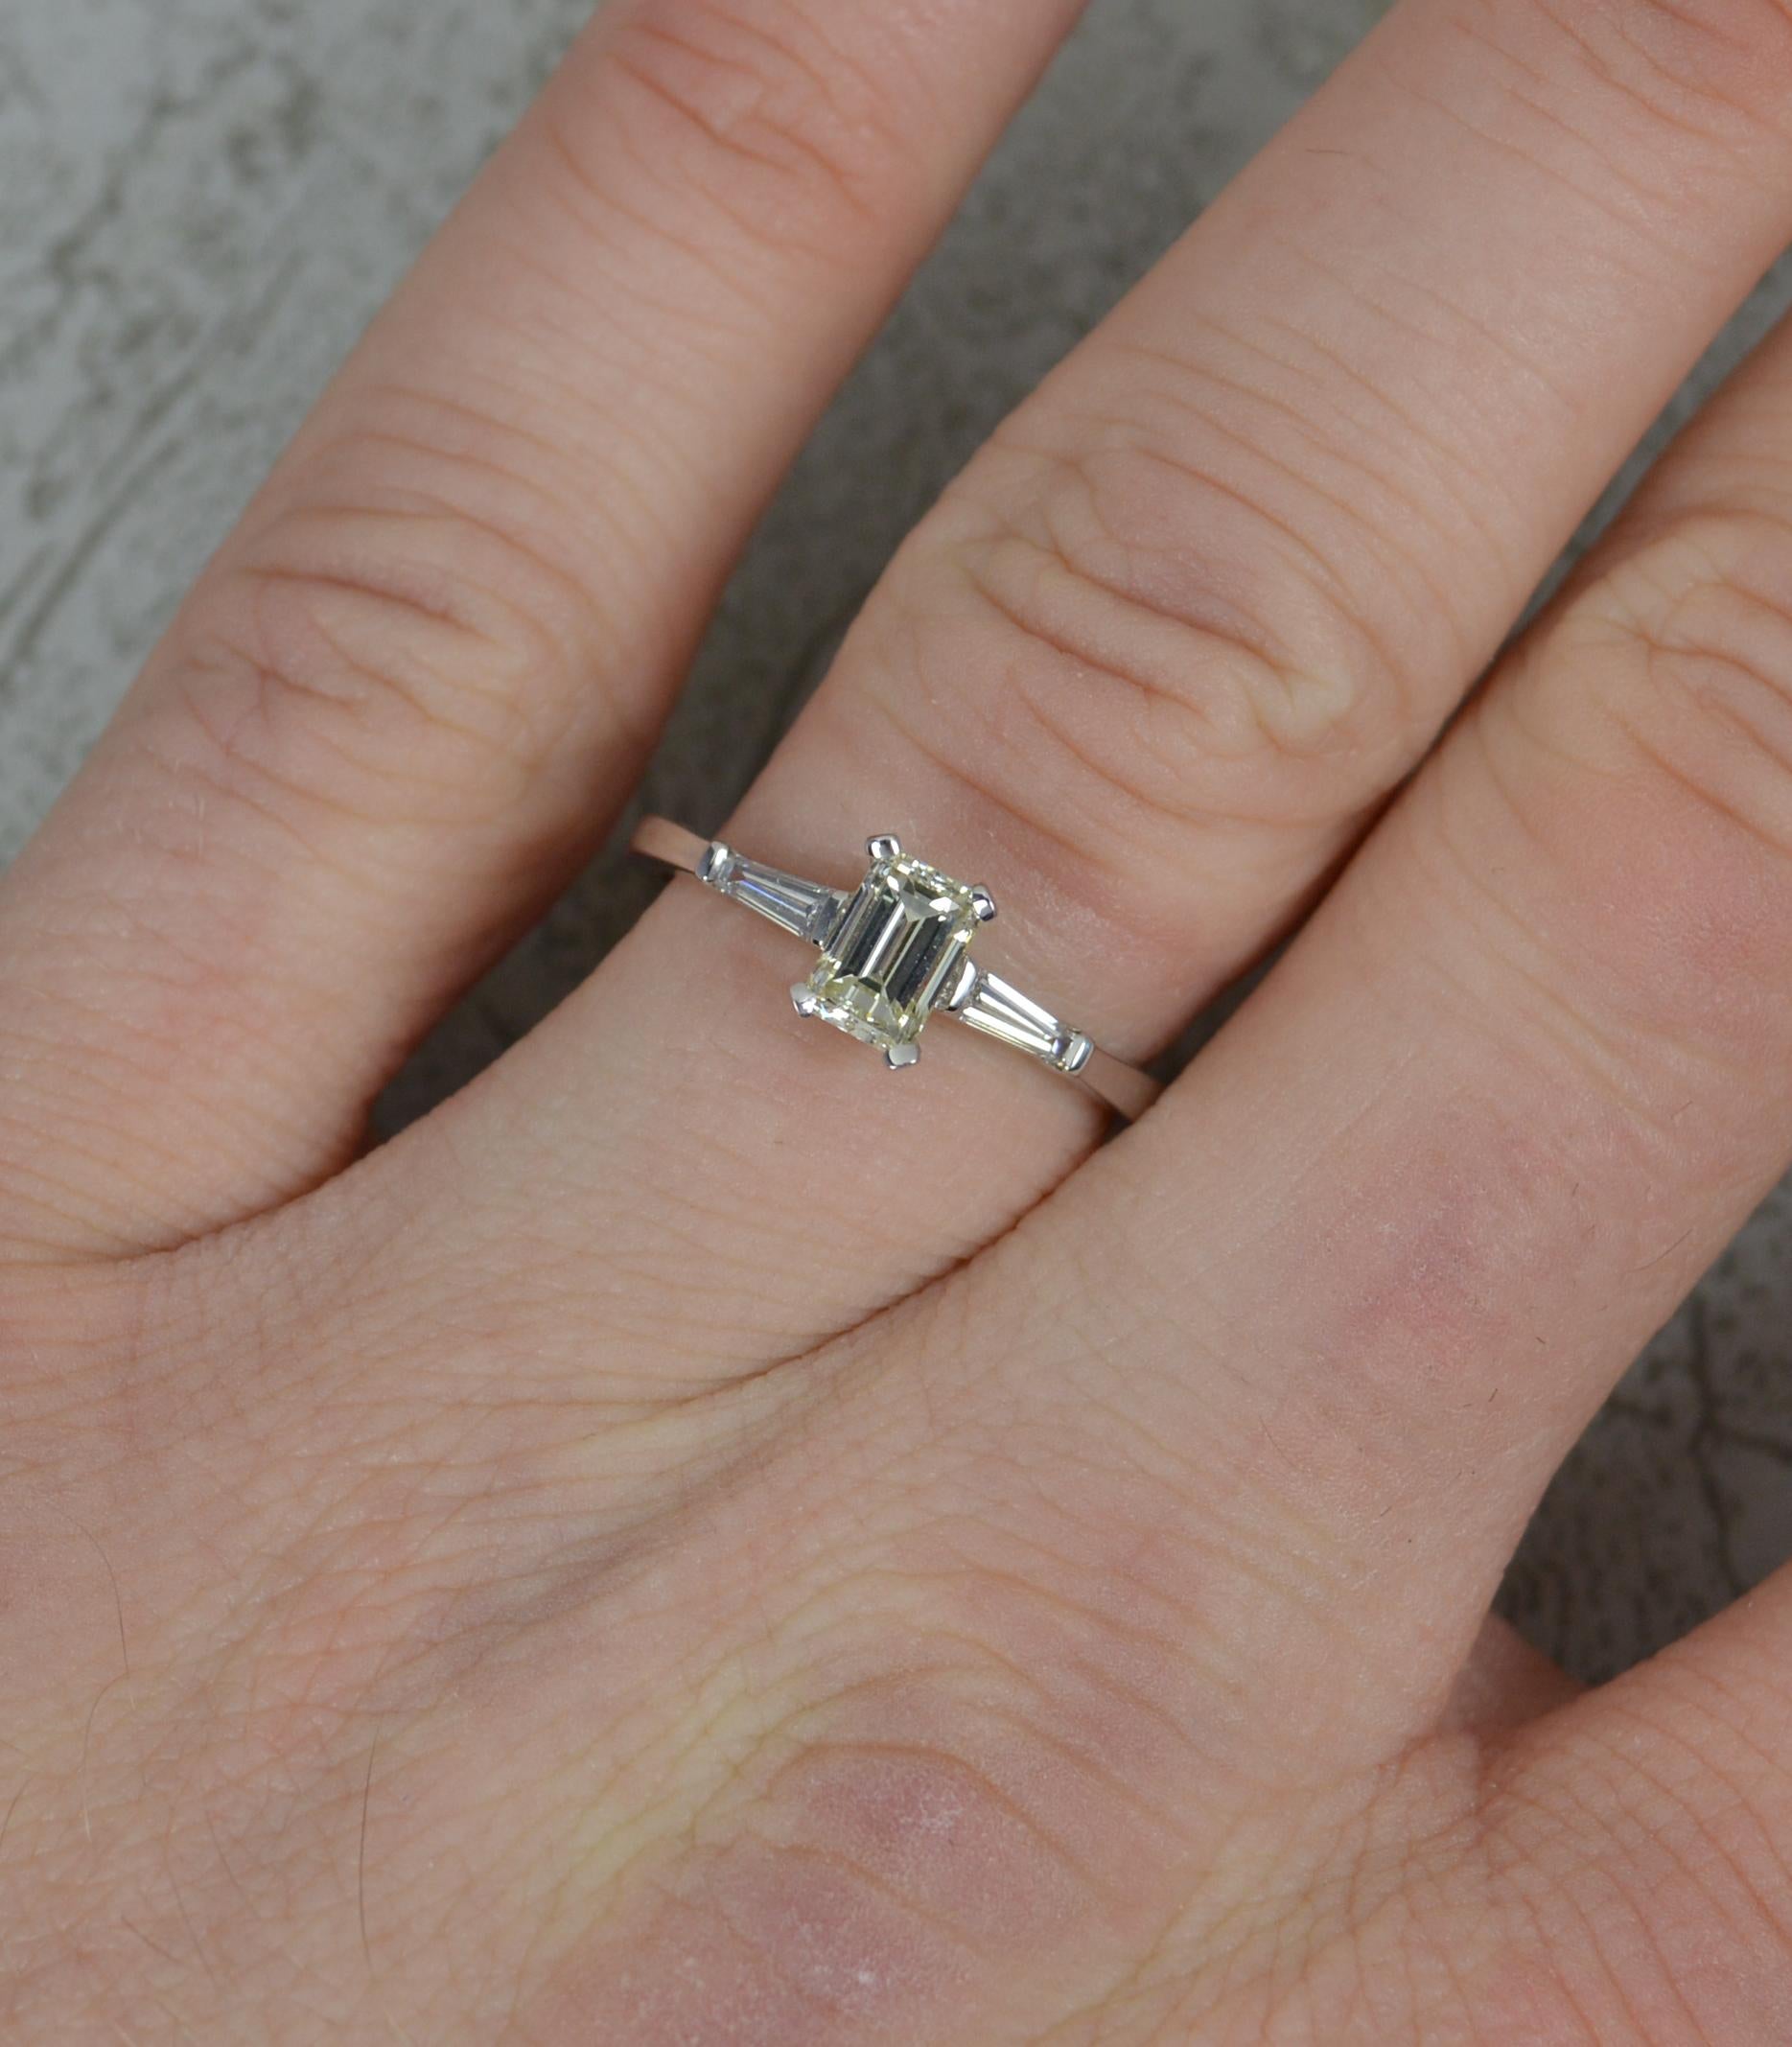 A wonderful diamond engagement ring.
Solid 18 carat white gold example.
Designed with an emerald cut diamond to centre, set into a four claw mount. 0.6cts. Vs clarity, natural light fancy yellow gold. Set with a tapered baguette cut diamond to each